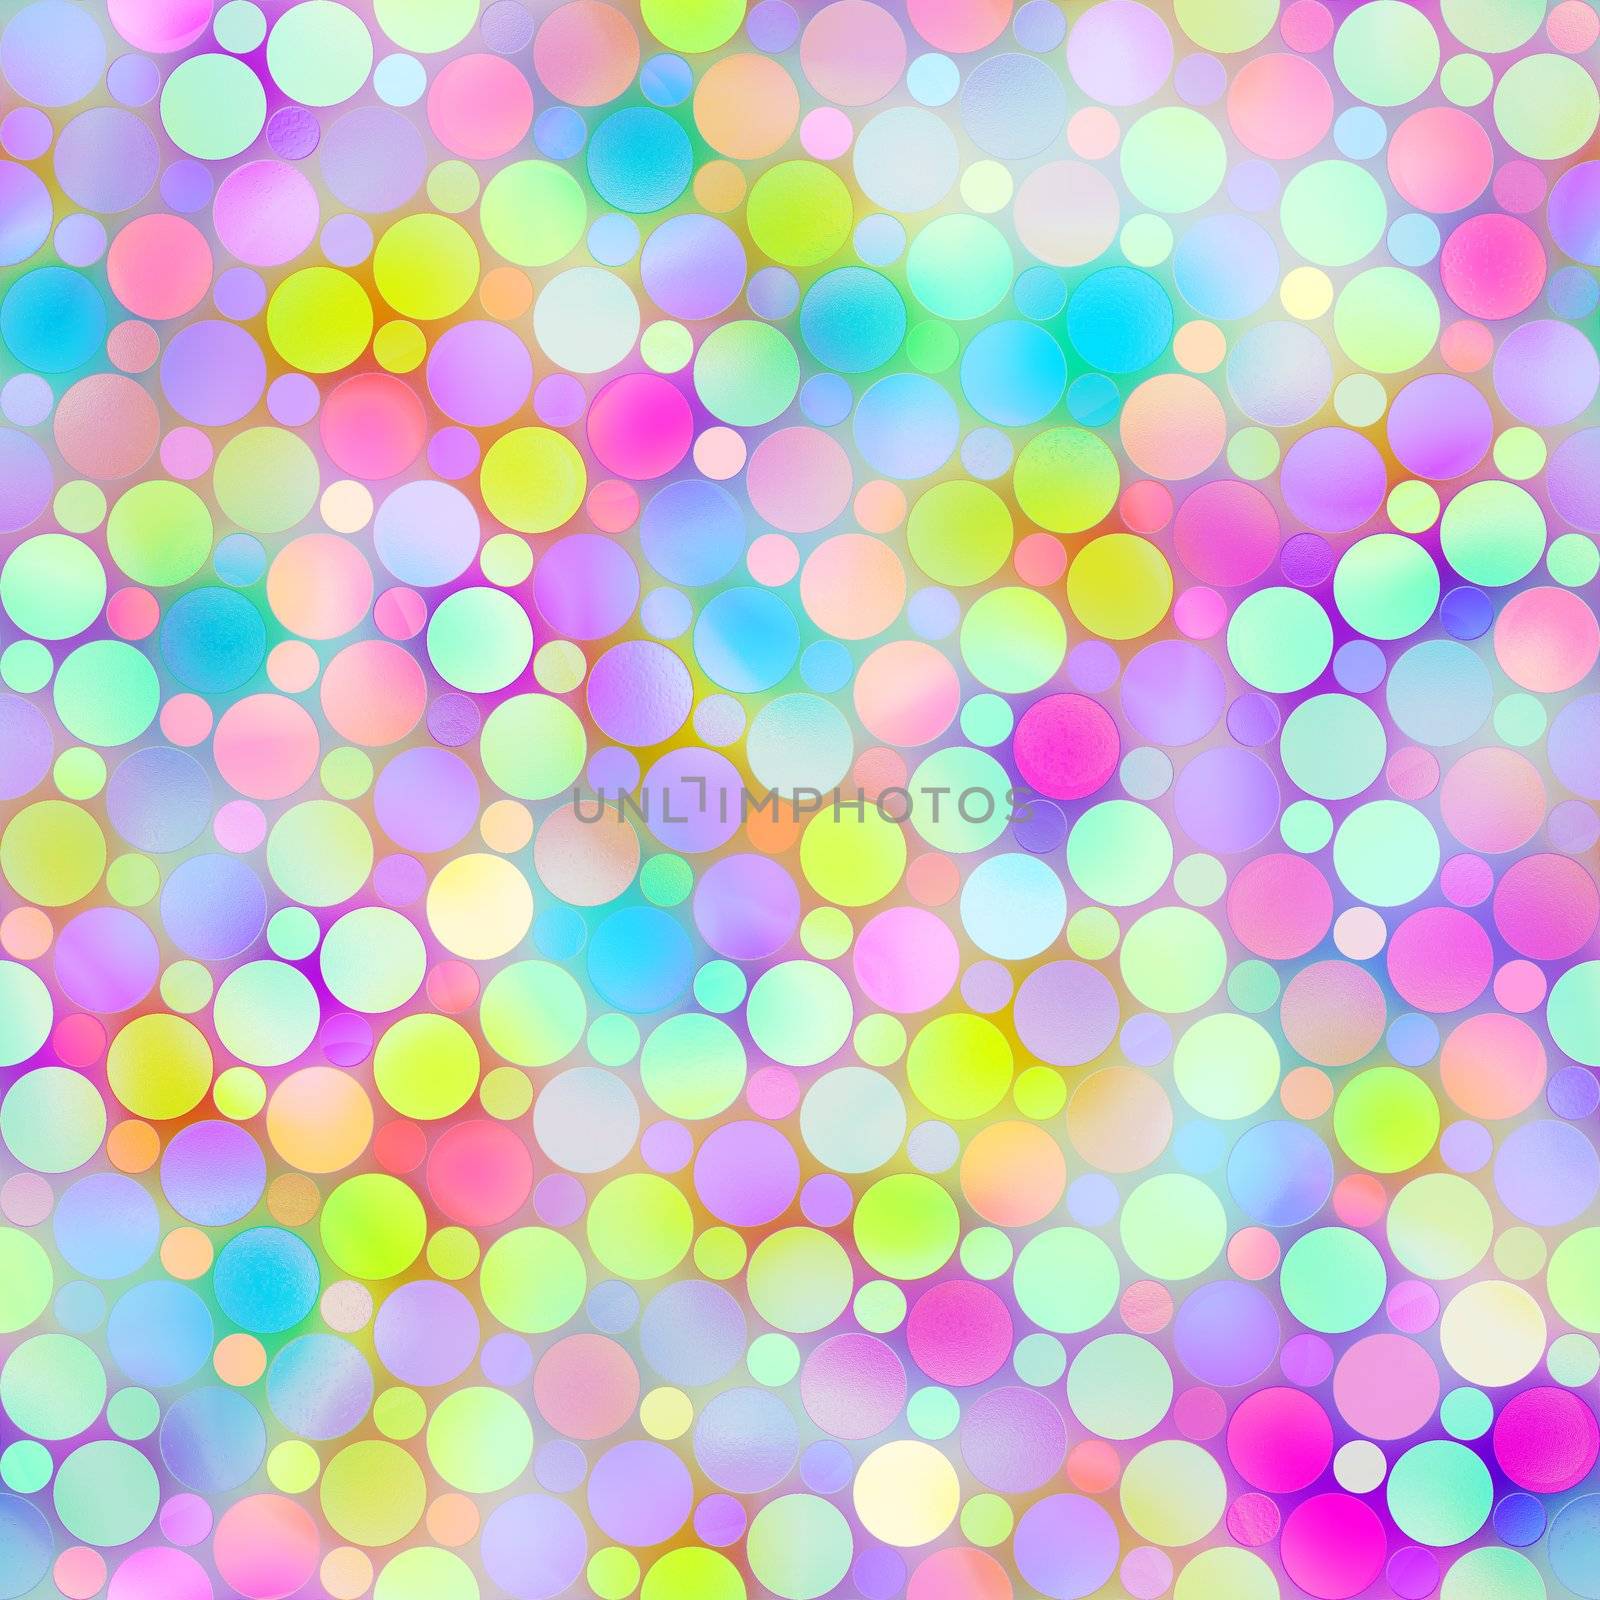 seamless texture of foam like dots in pastel colors